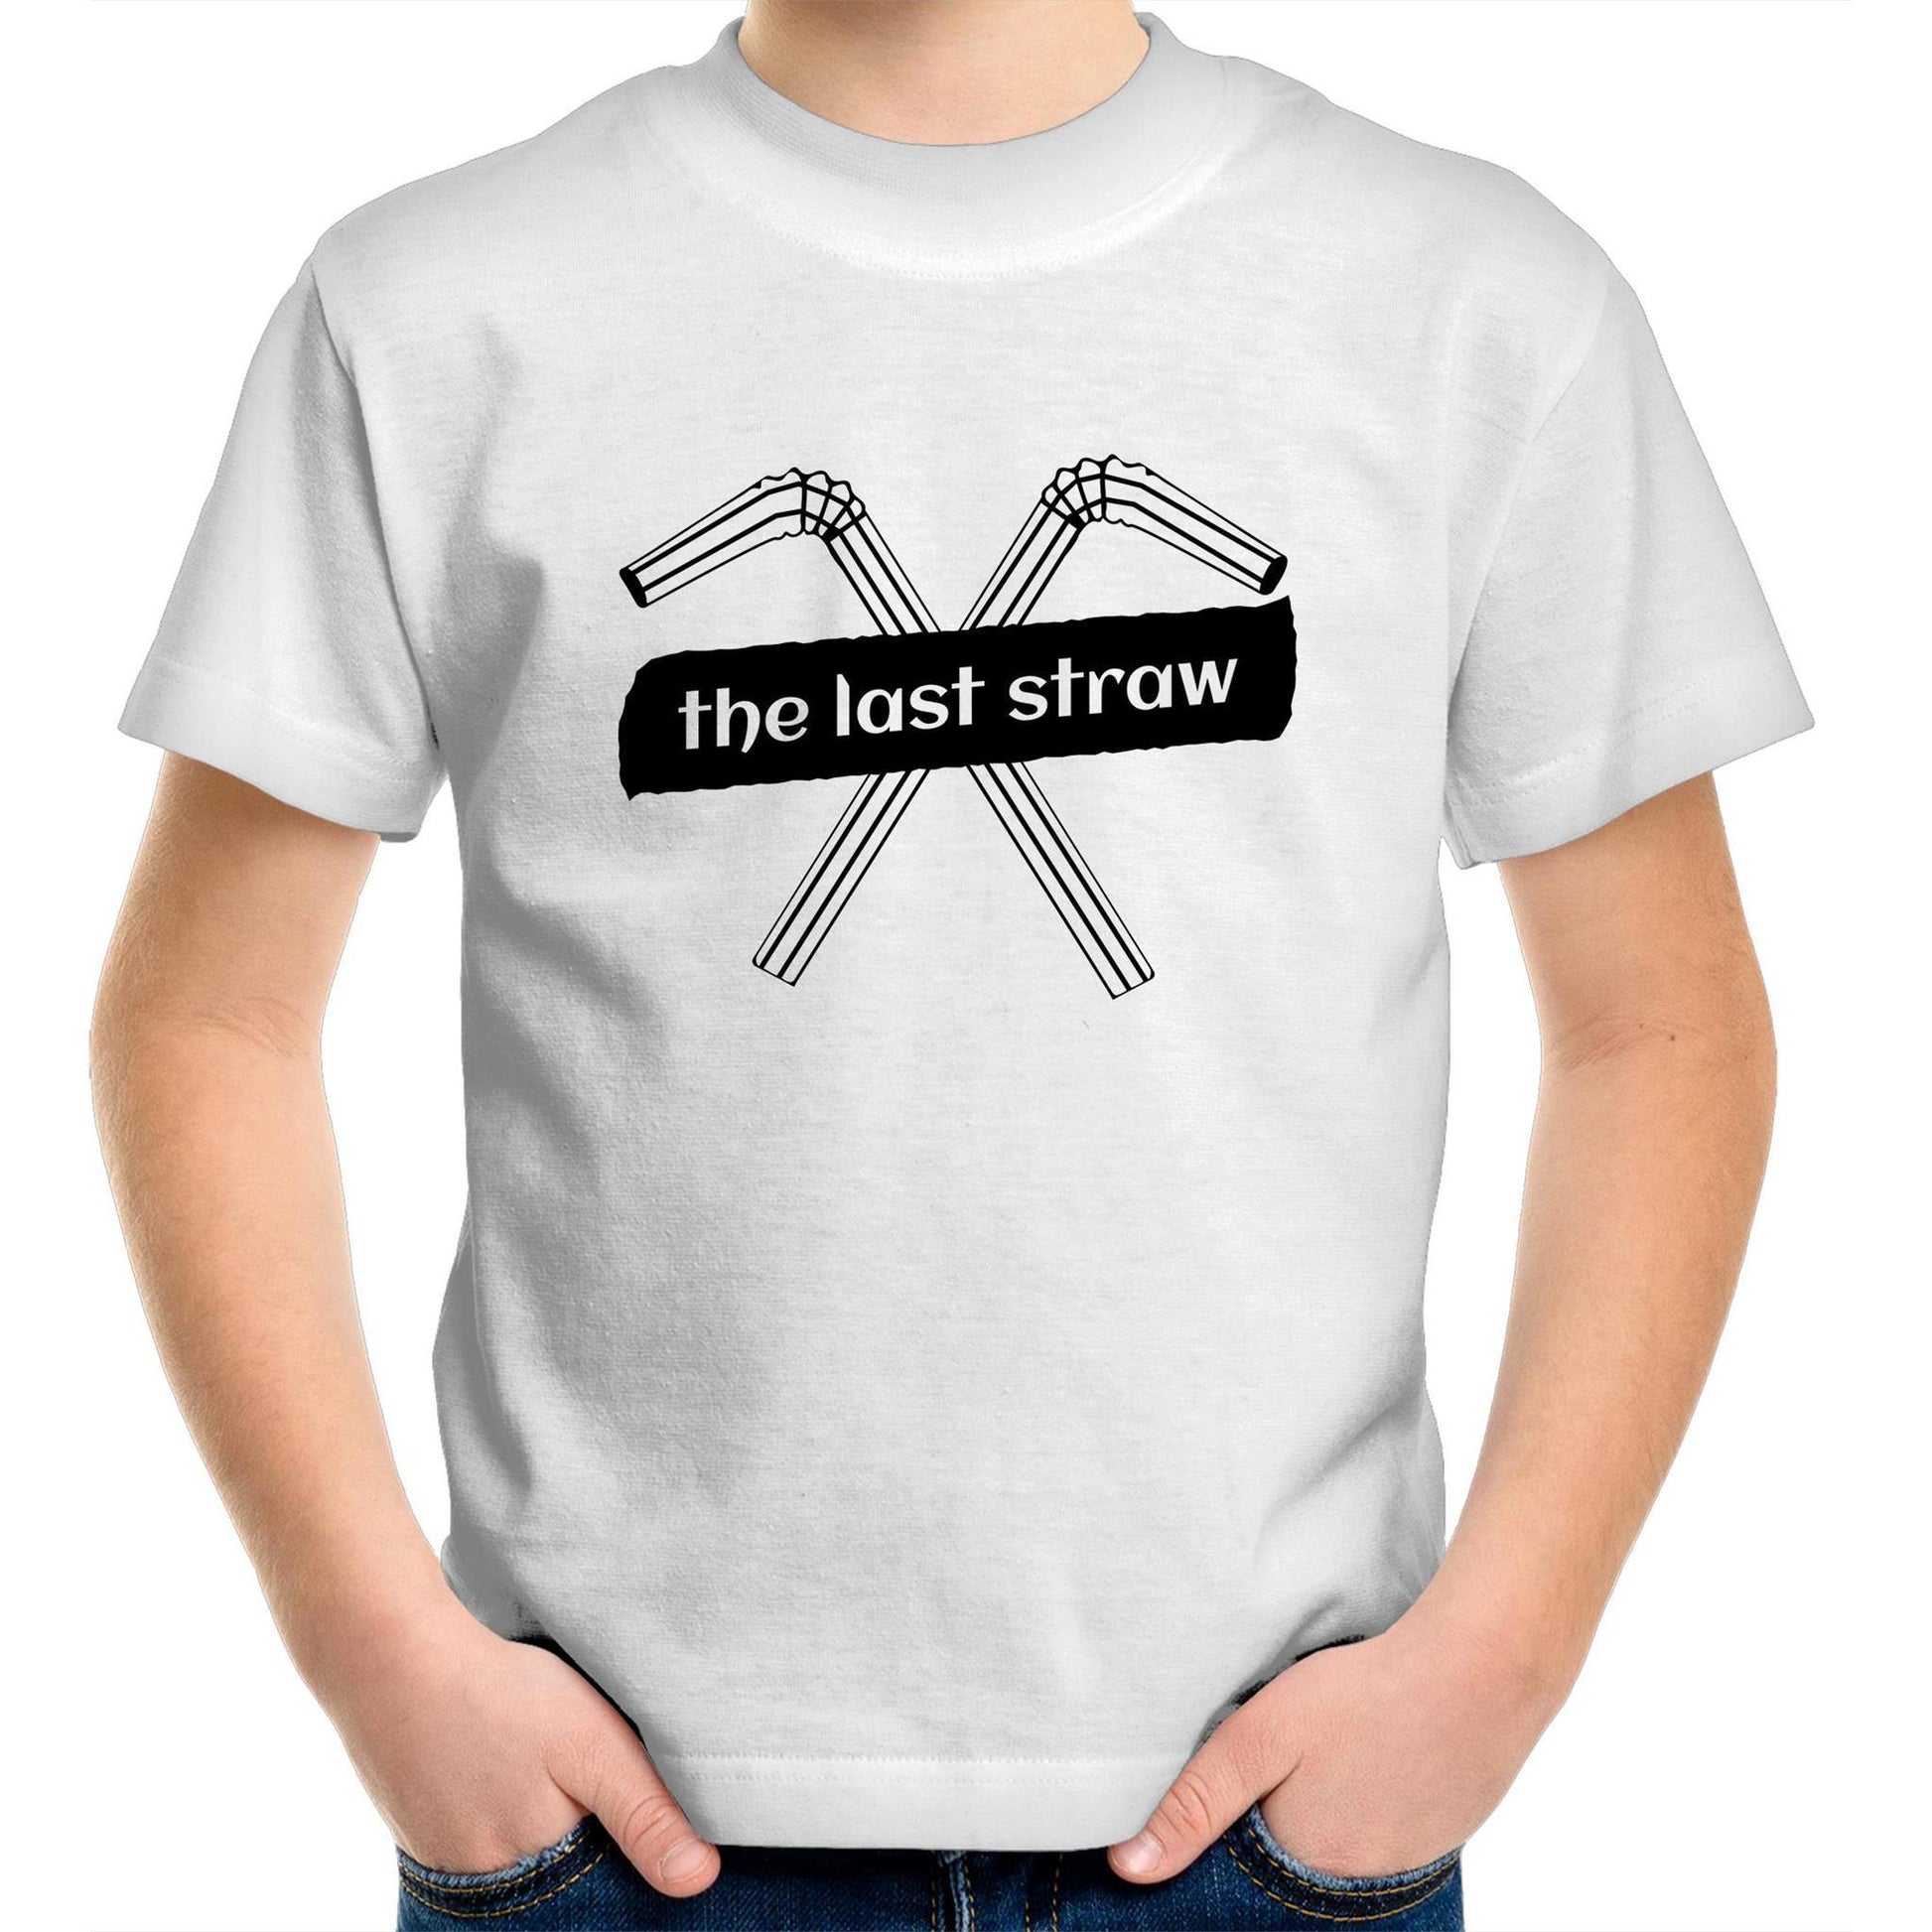 The Last Straw - Kids Youth Crew T-Shirt White Kids Youth T-shirt Environment